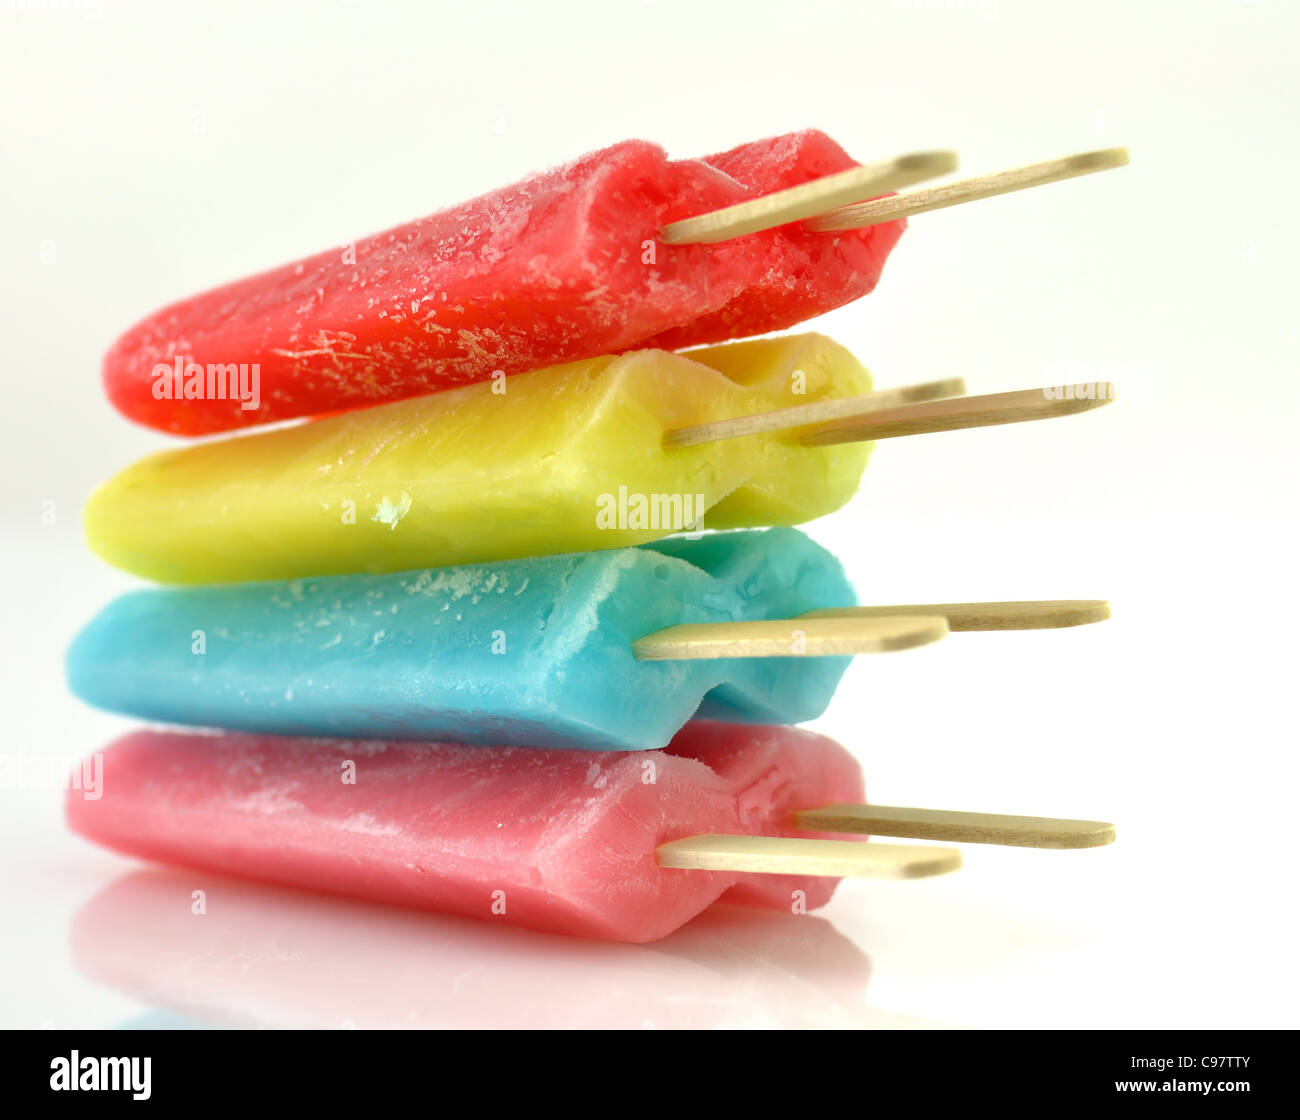 https://c8.alamy.com/comp/C97TTY/colorful-ice-cream-pops-on-a-white-background-close-up-C97TTY.jpg